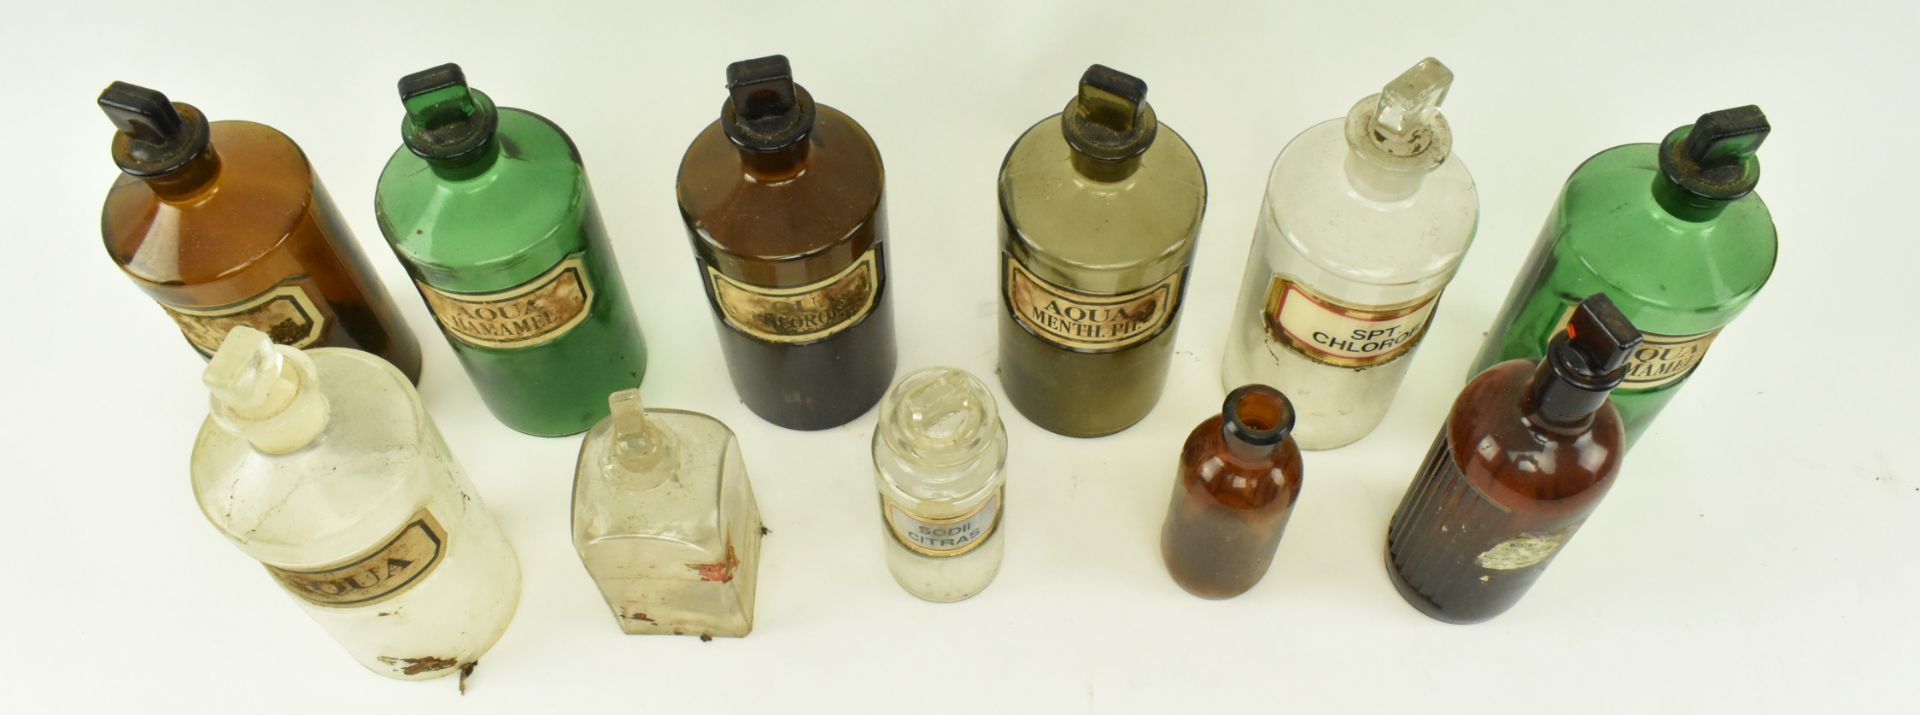 SELECTION OF EARLY 20TH CENTURY APOTHECARY BOTTLES - Image 3 of 6